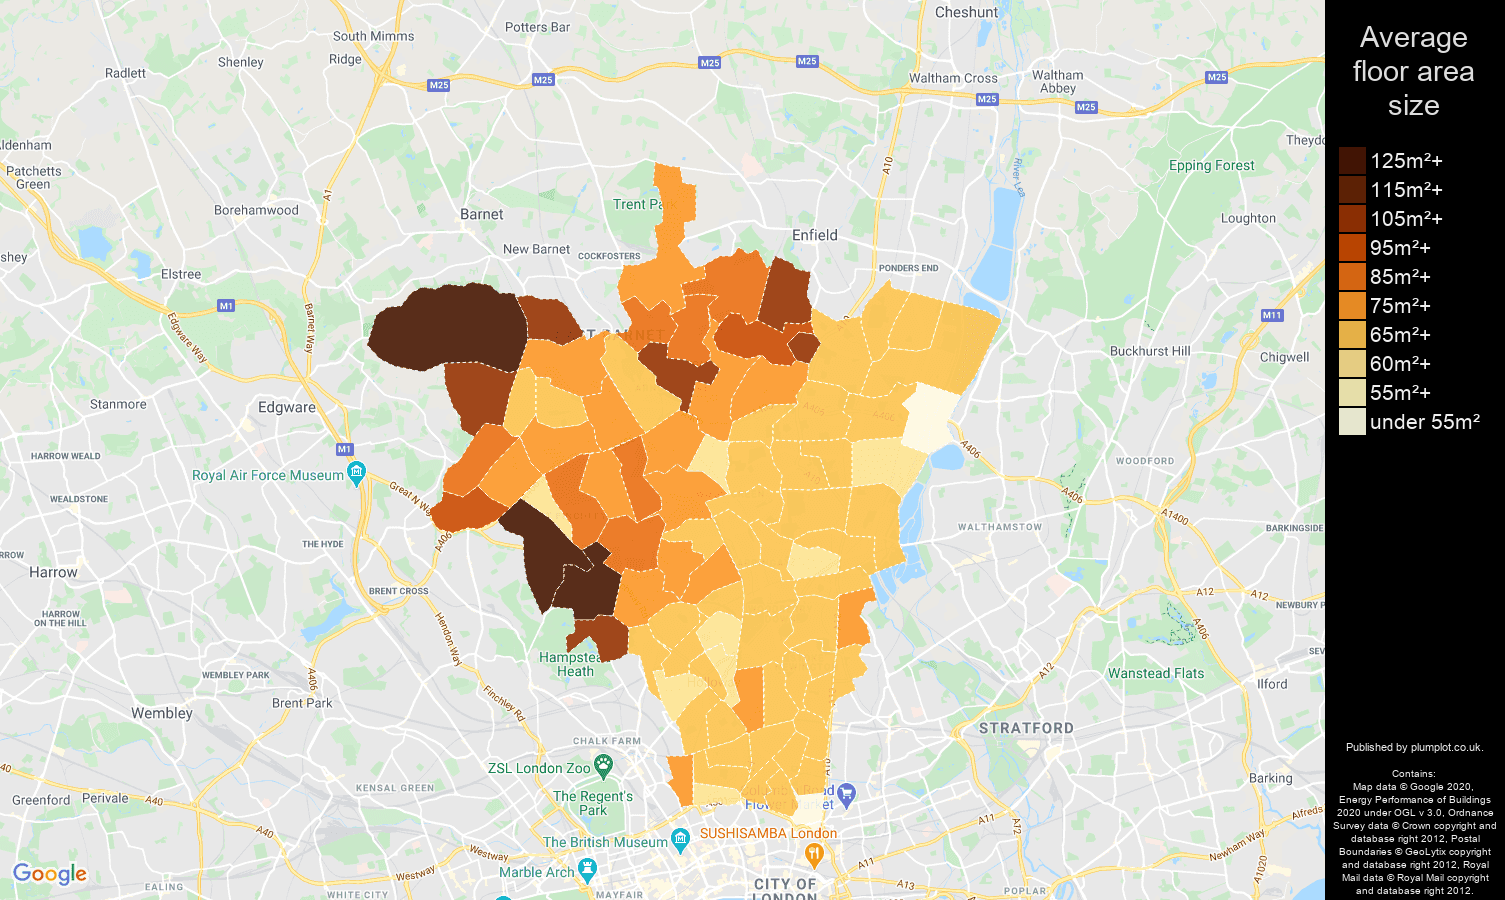 North London map of average floor area size of properties